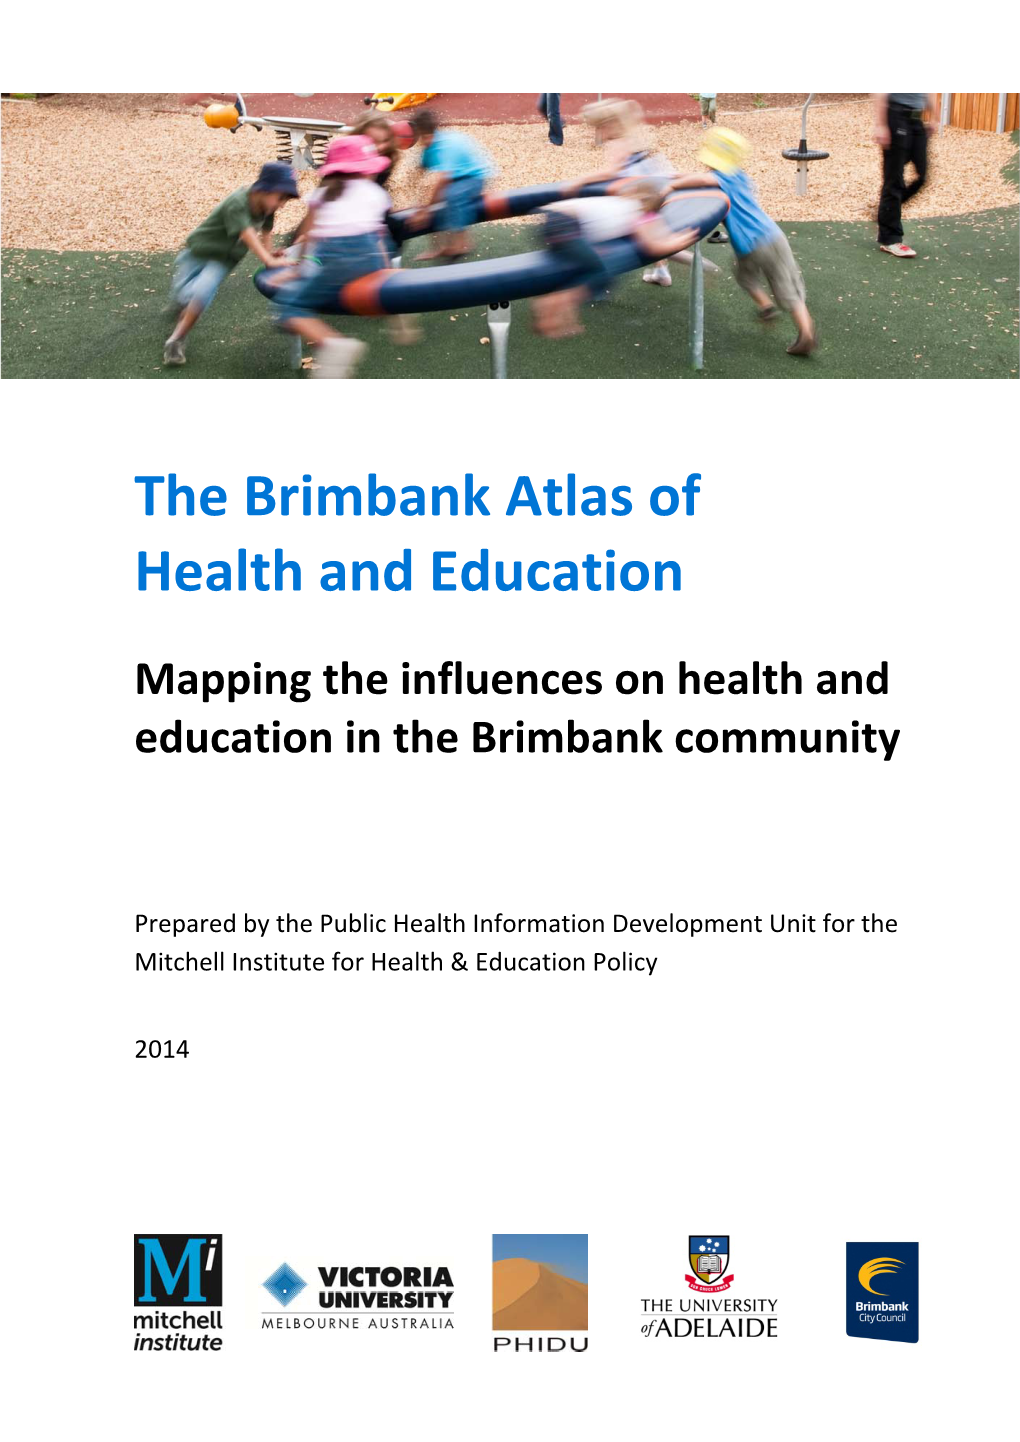 The Brimbank Atlas of Health and Education